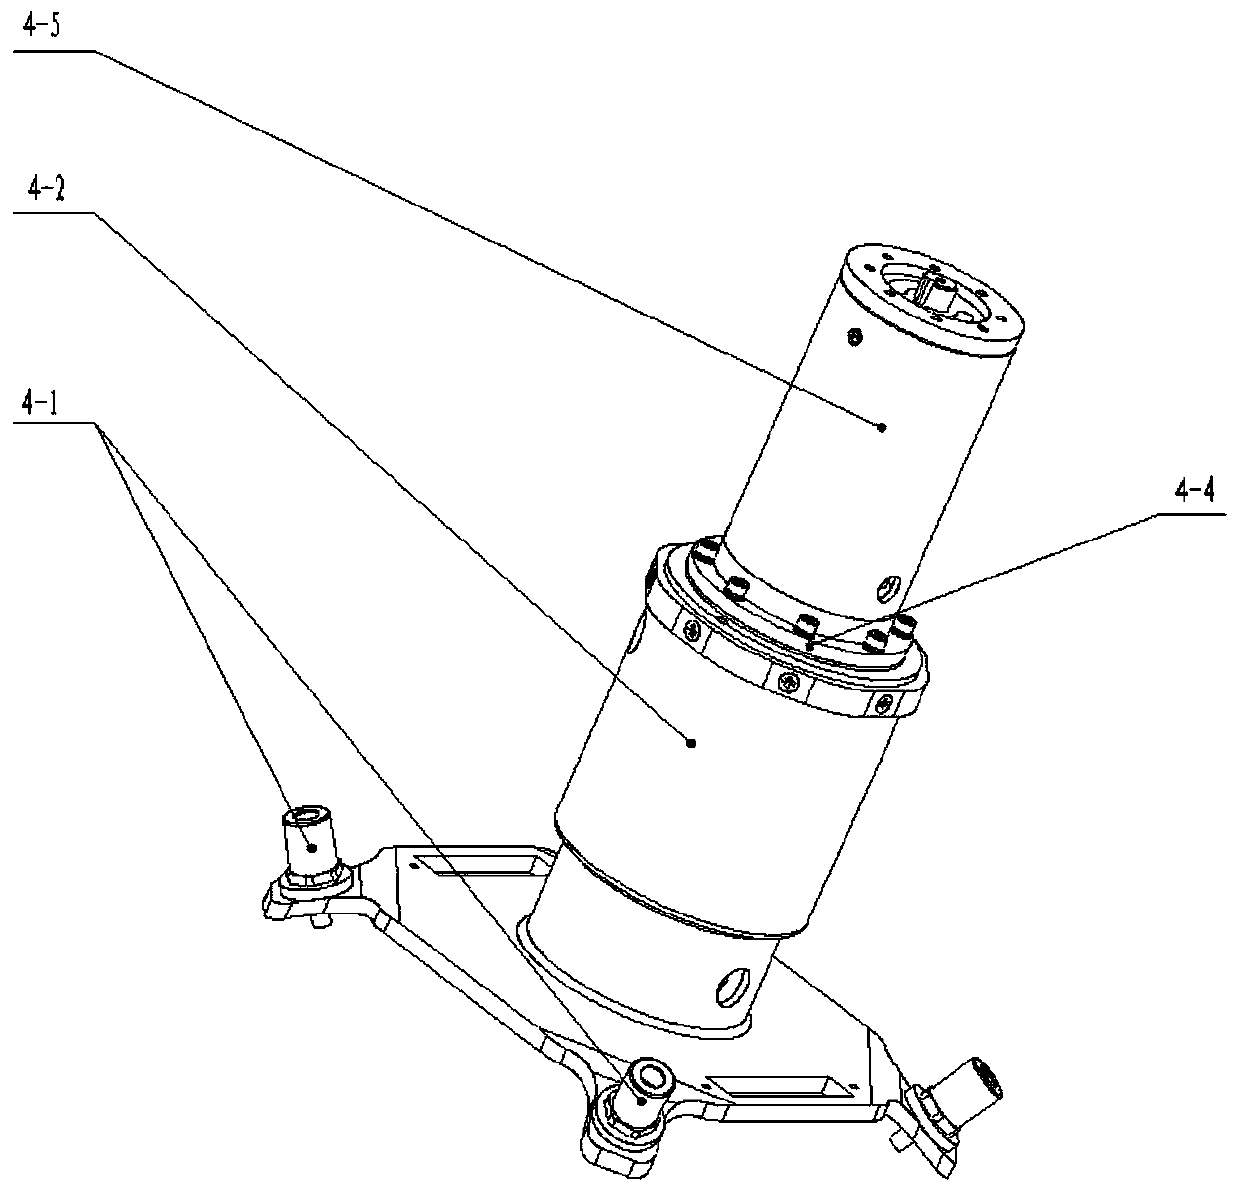 Two-dimensional turntable accompanying projection lighting device in space microgravity environment